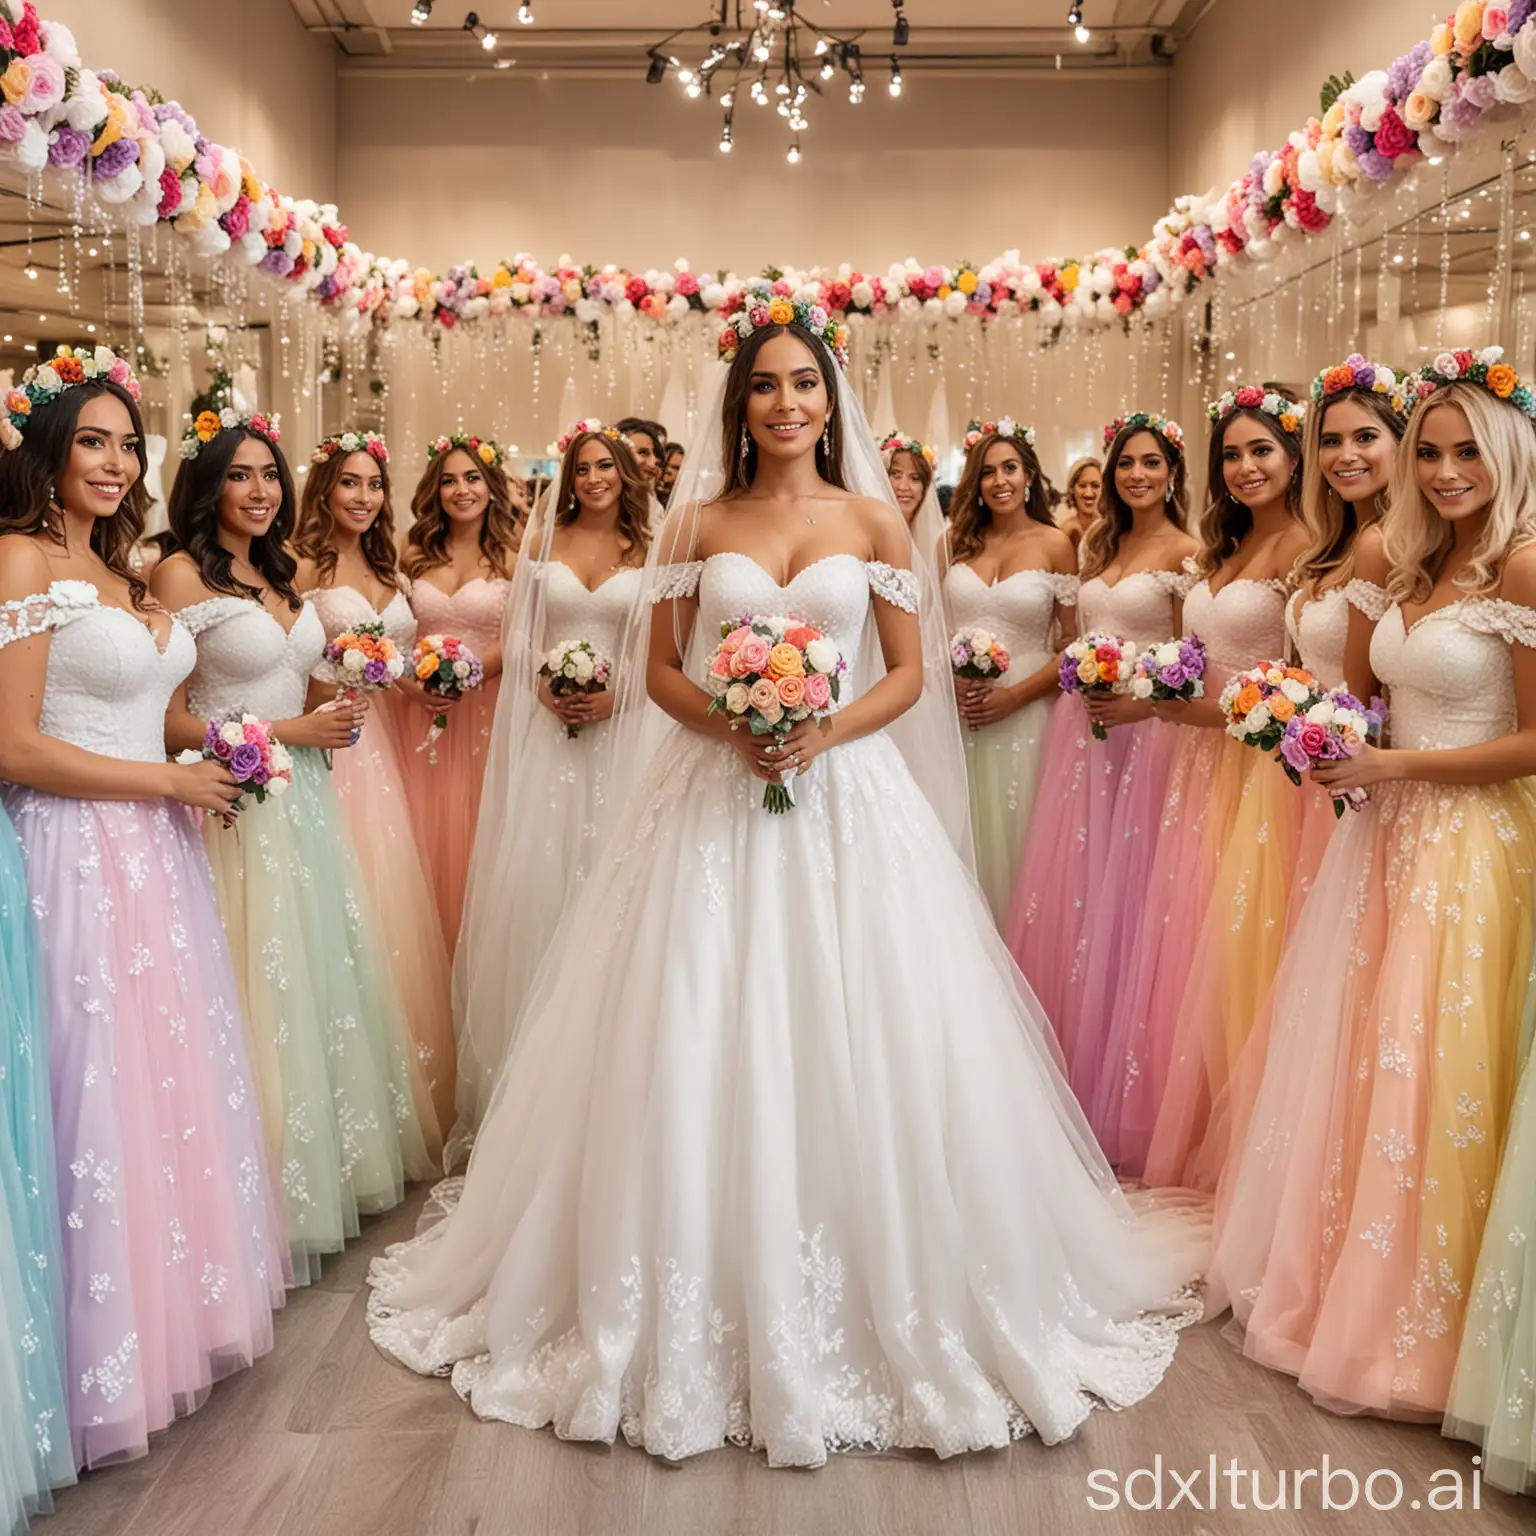 Crowd of Anitta and her clones dressed in colorful bride dresses with veil and wreath with colored gloves entering together in the wedding dress store marry me